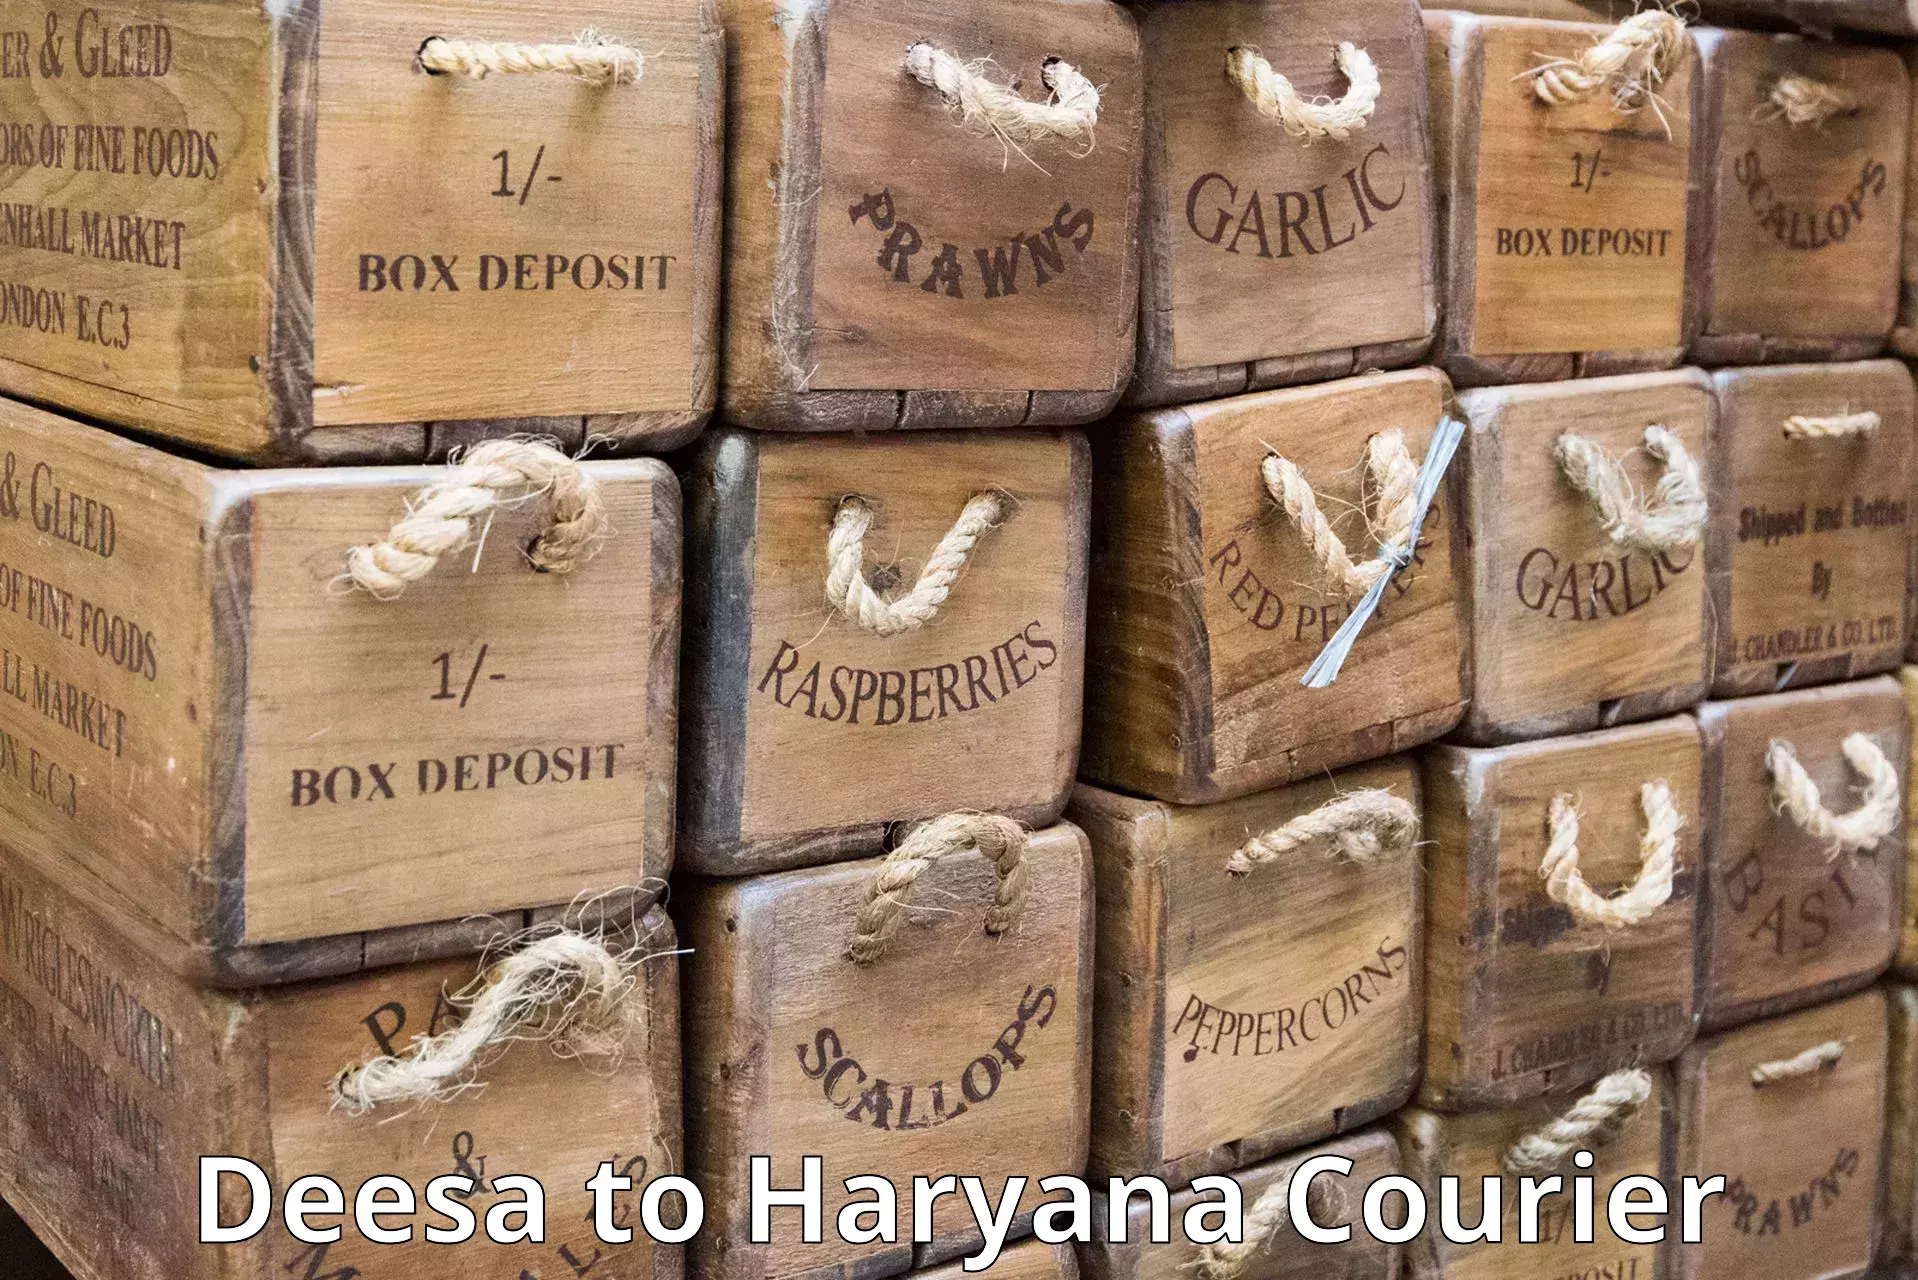 Customer-oriented courier services Deesa to NCR Haryana